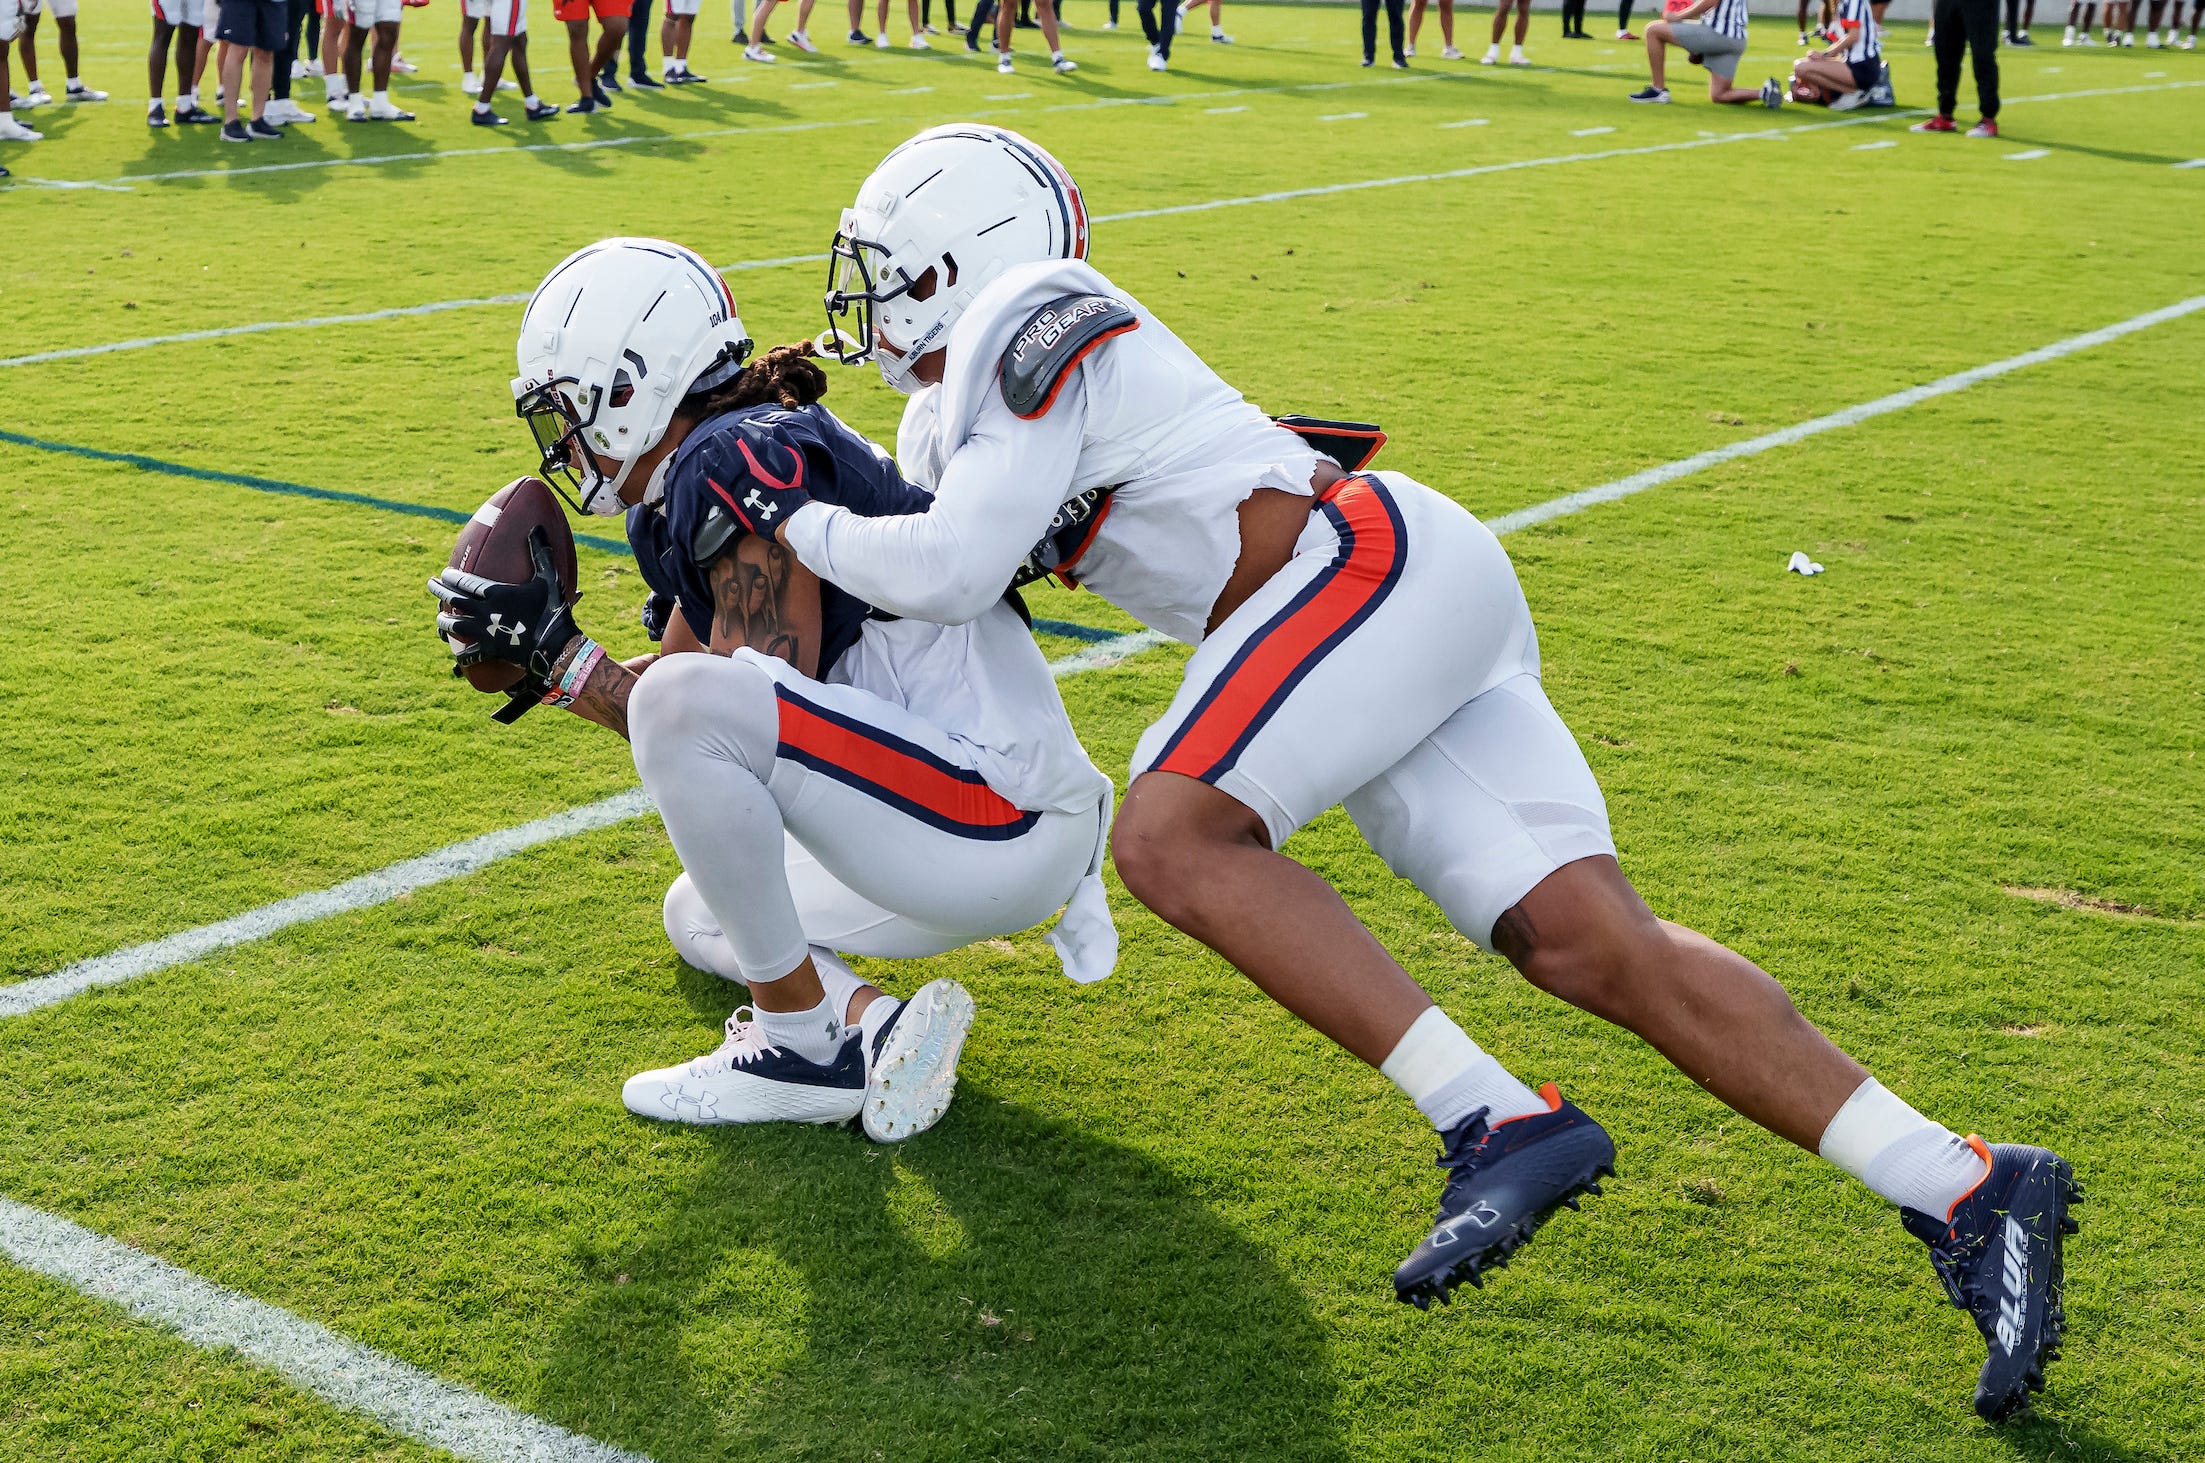 College Football/Game of the Week: Big plays power No. 13 Auburn